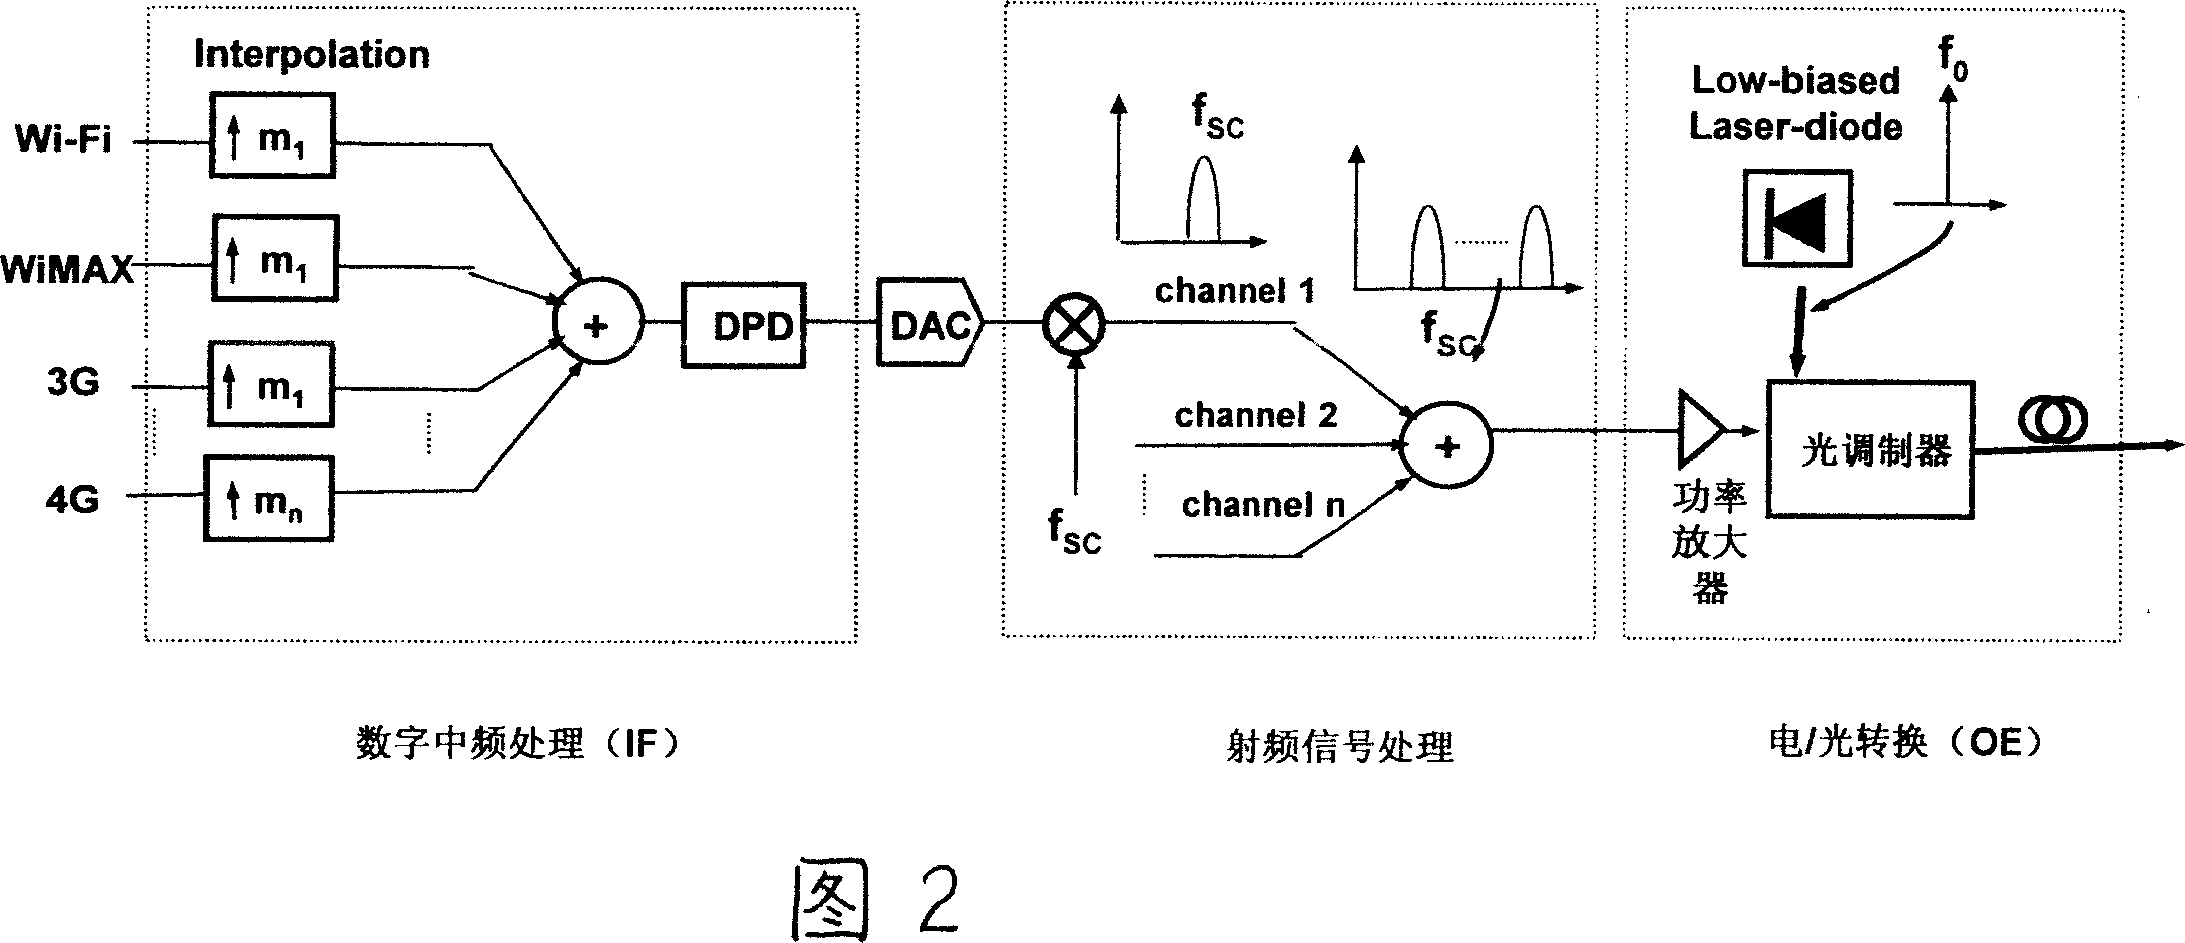 Processing method for radio access system on downlink signals based on optical fiber radio